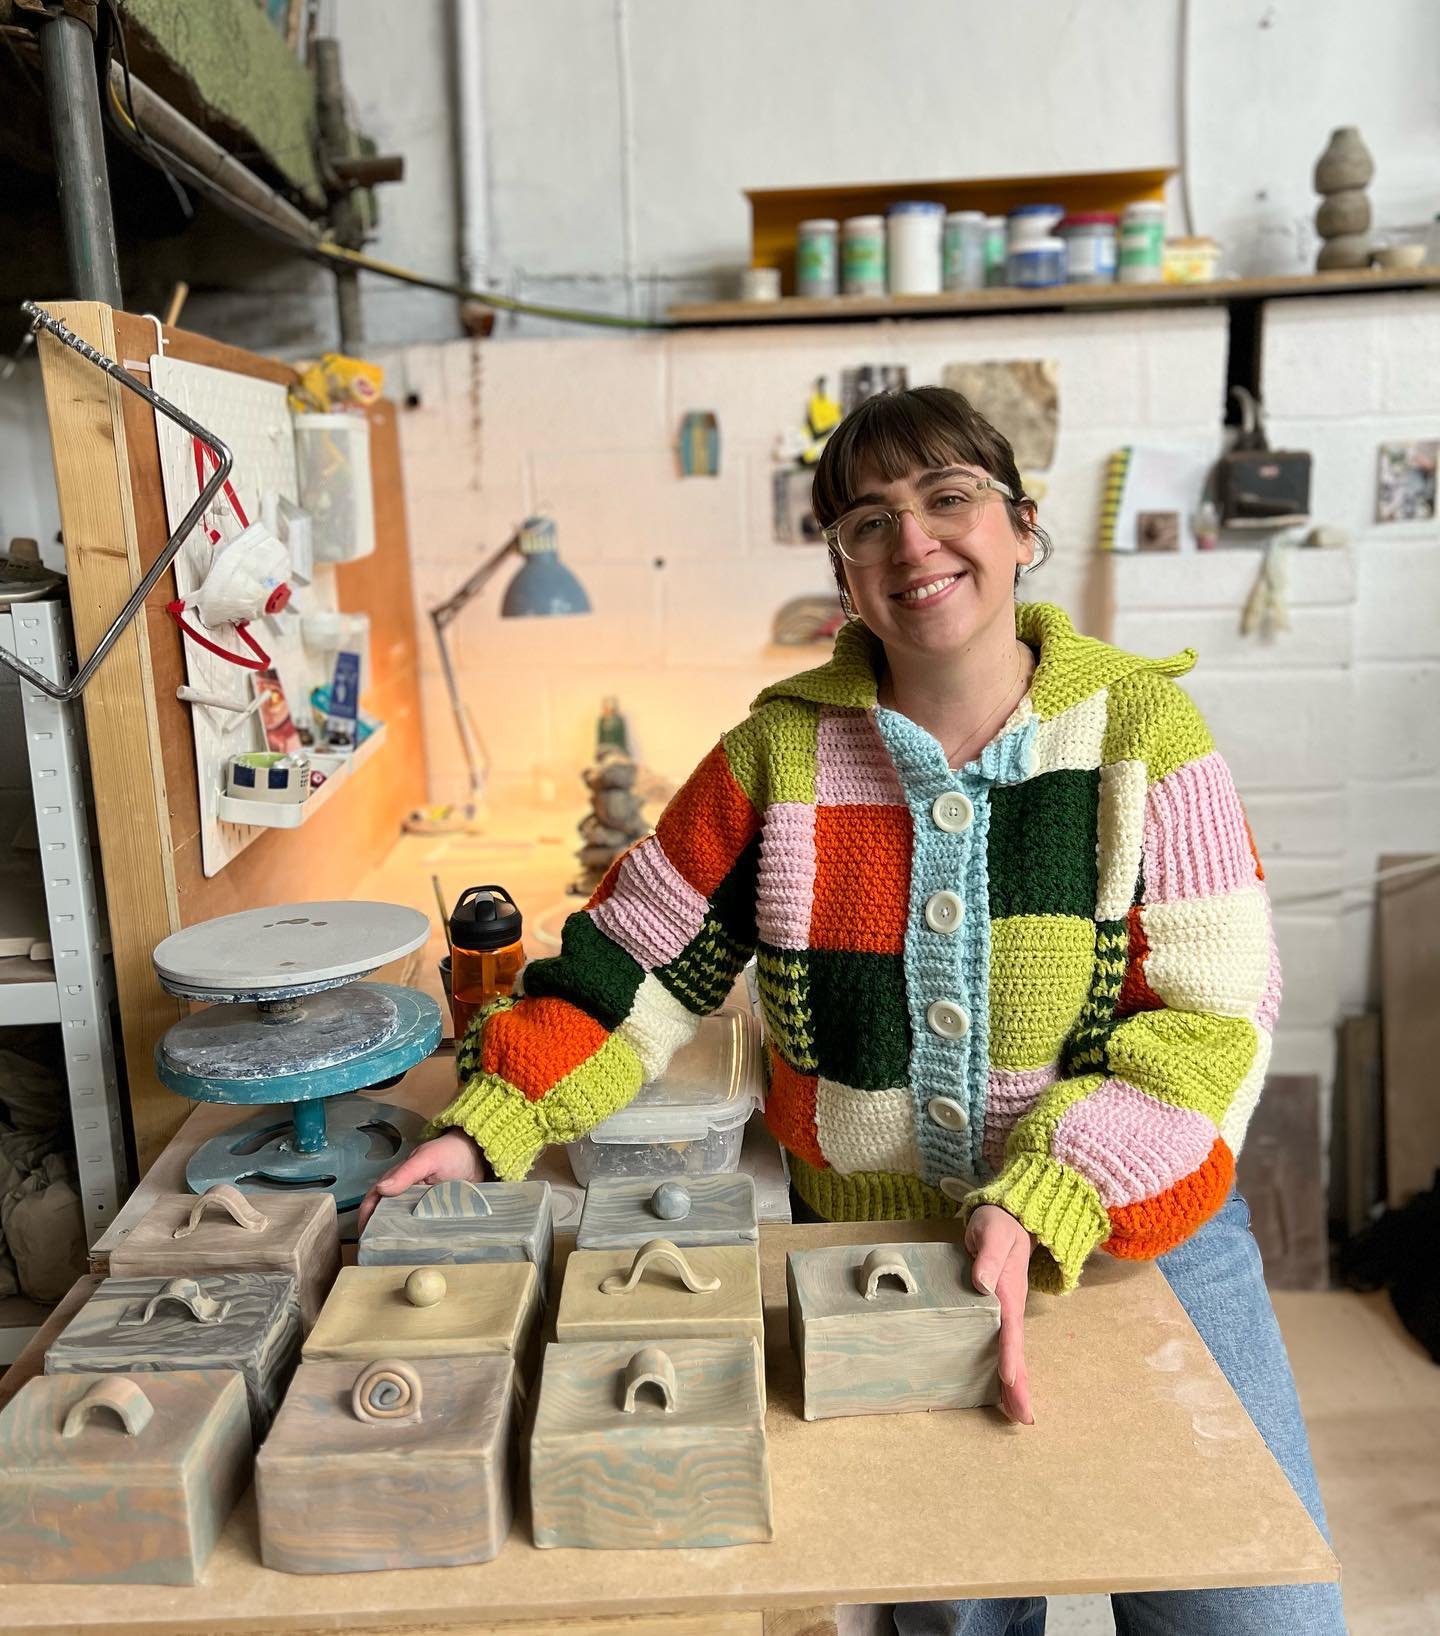 The first ever butter dish workshop was bloody lovely, literally obsessed with everyones butter dishes and seeing everyone getting stuck in and loving on coloured clay was speciaaaaallll. Most people at the workshop had never done pottery before, so 